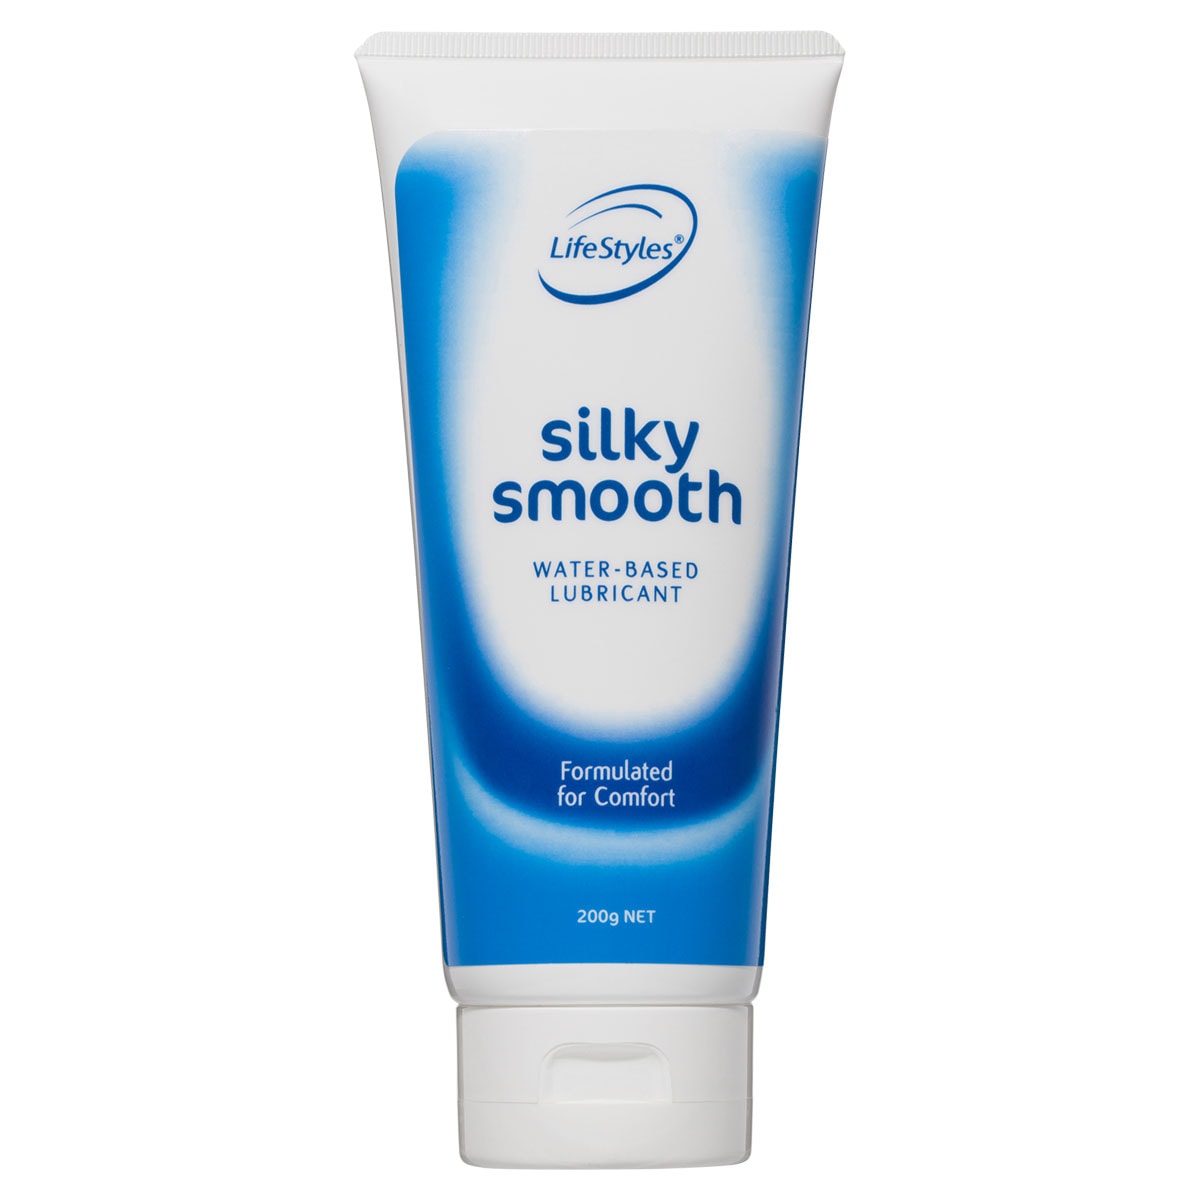 LifeStyles Silky Smooth Water Based Lubricant 200g